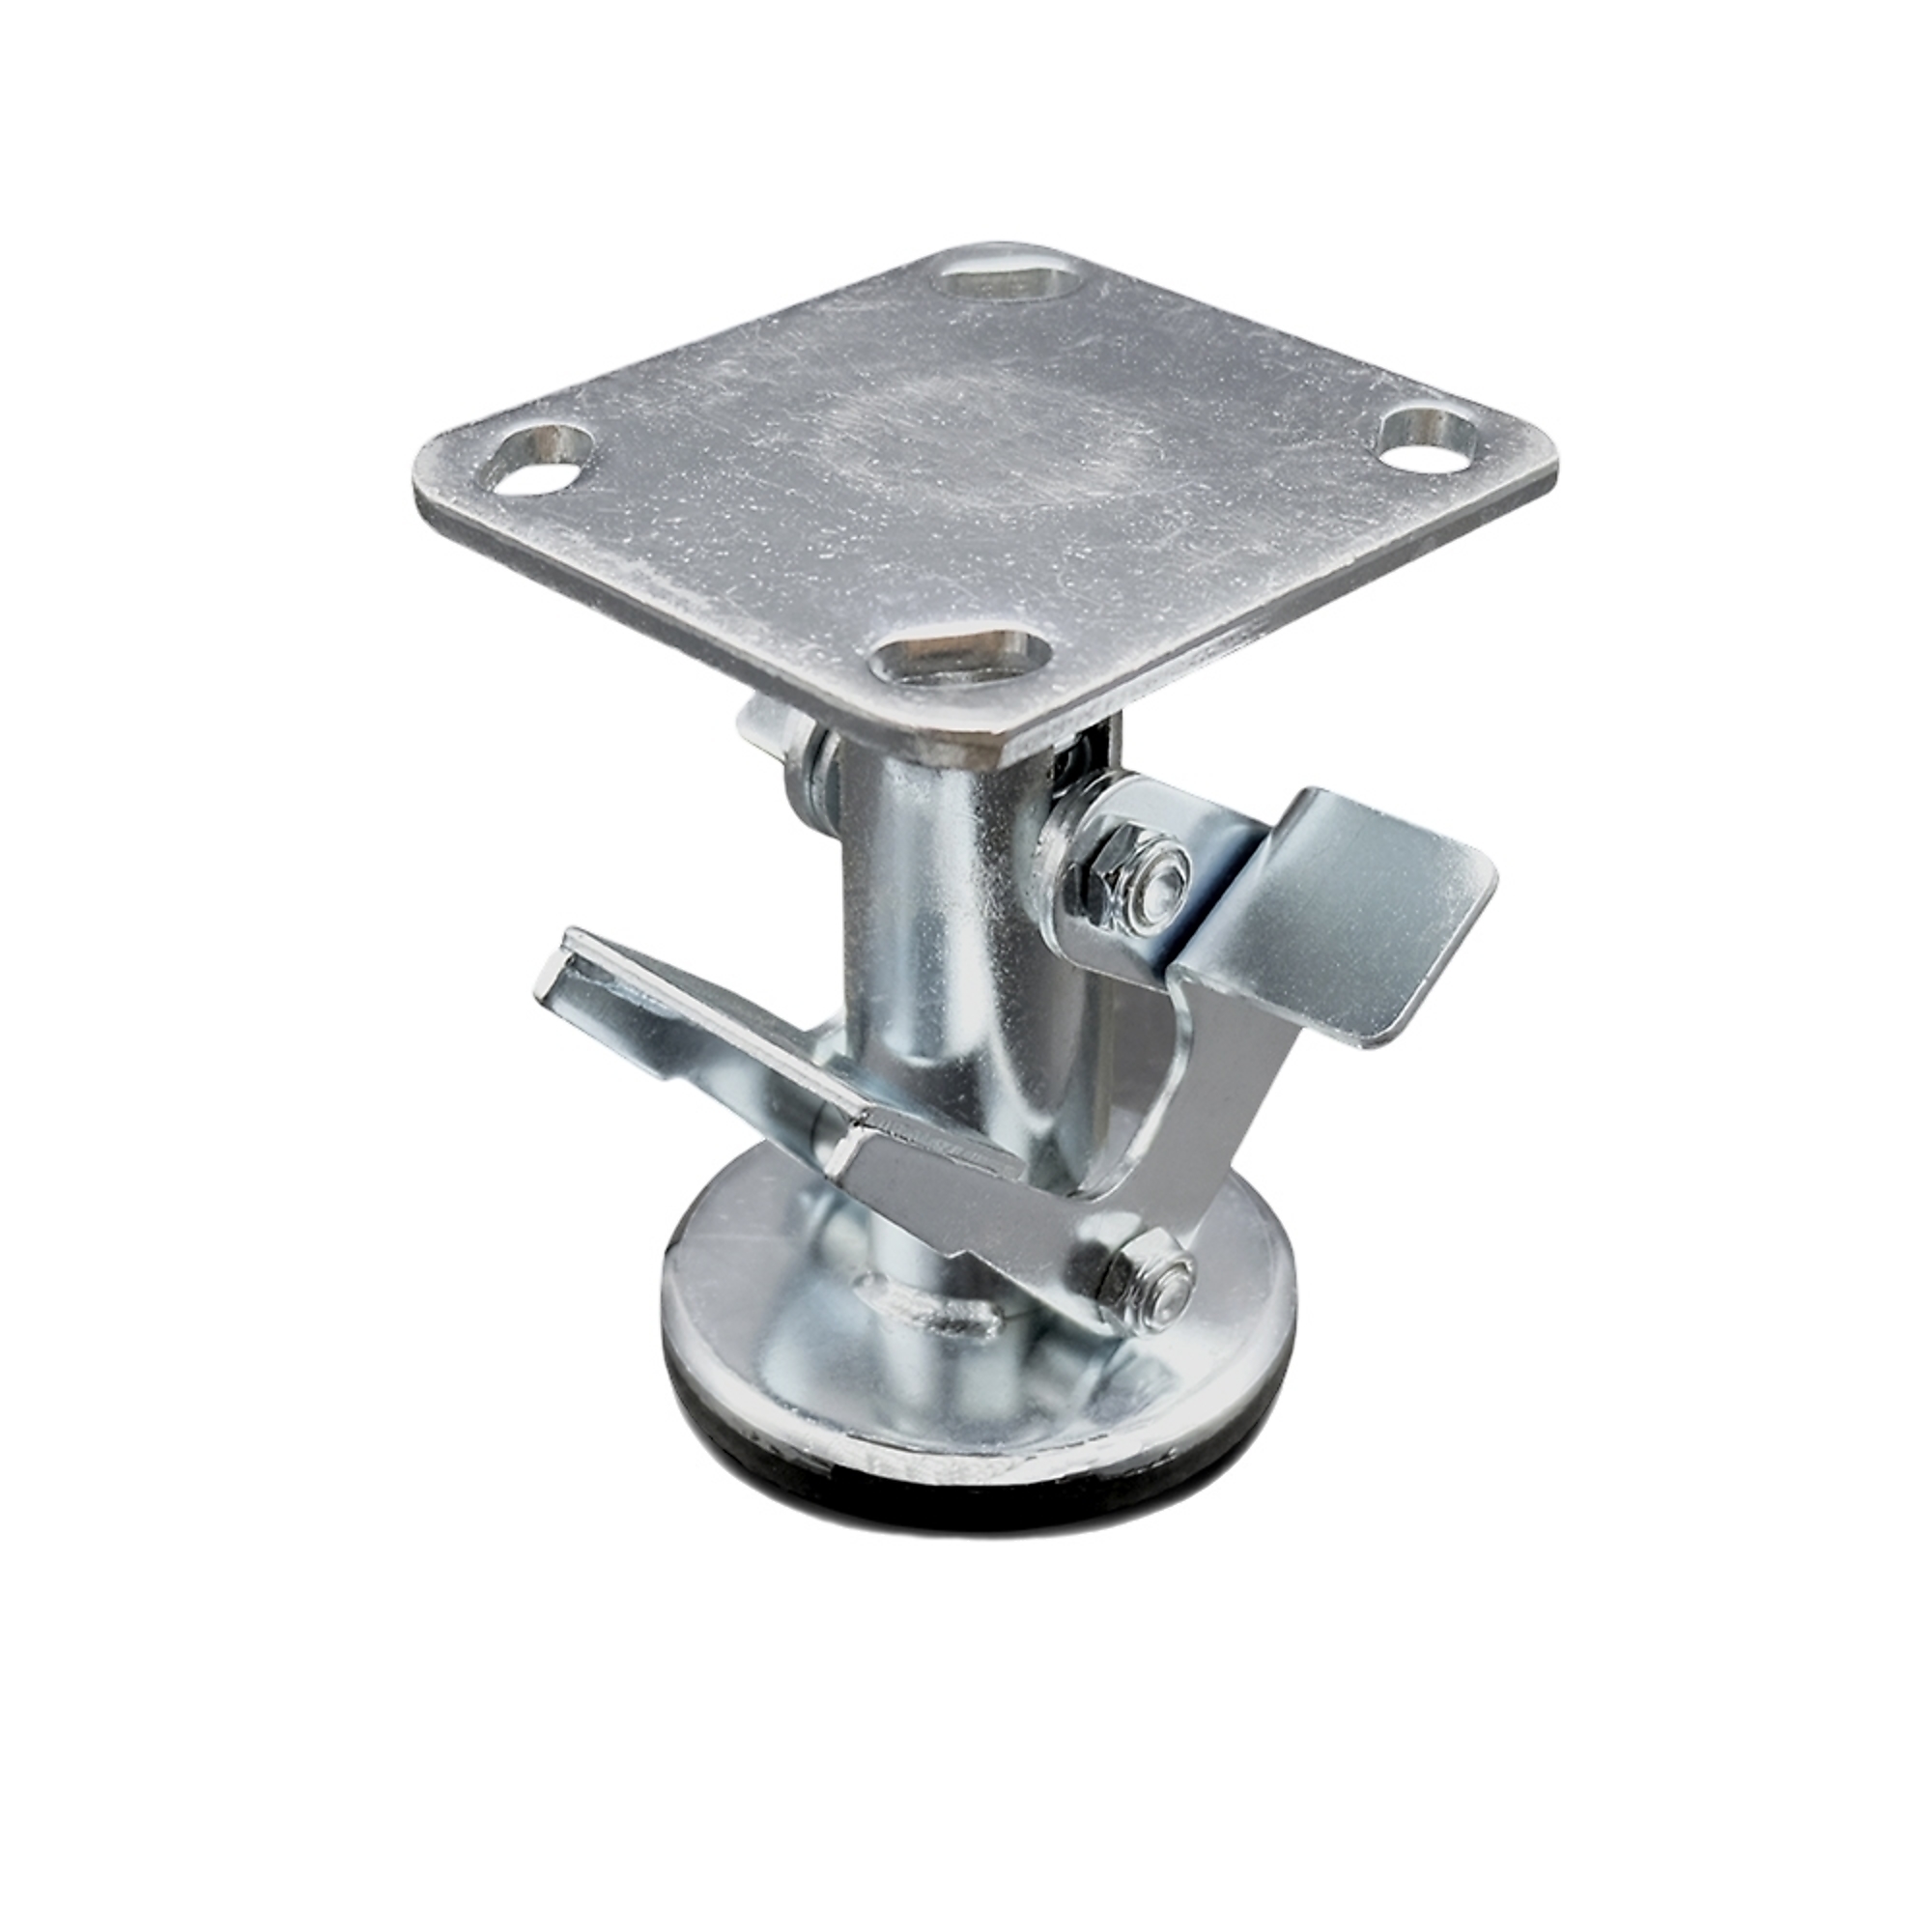 Service Caster, 5Inch Double Pedal Floor Truck Lock, Caster Type Rigid, Package (qty.) 1, Model SCC-FL500DP